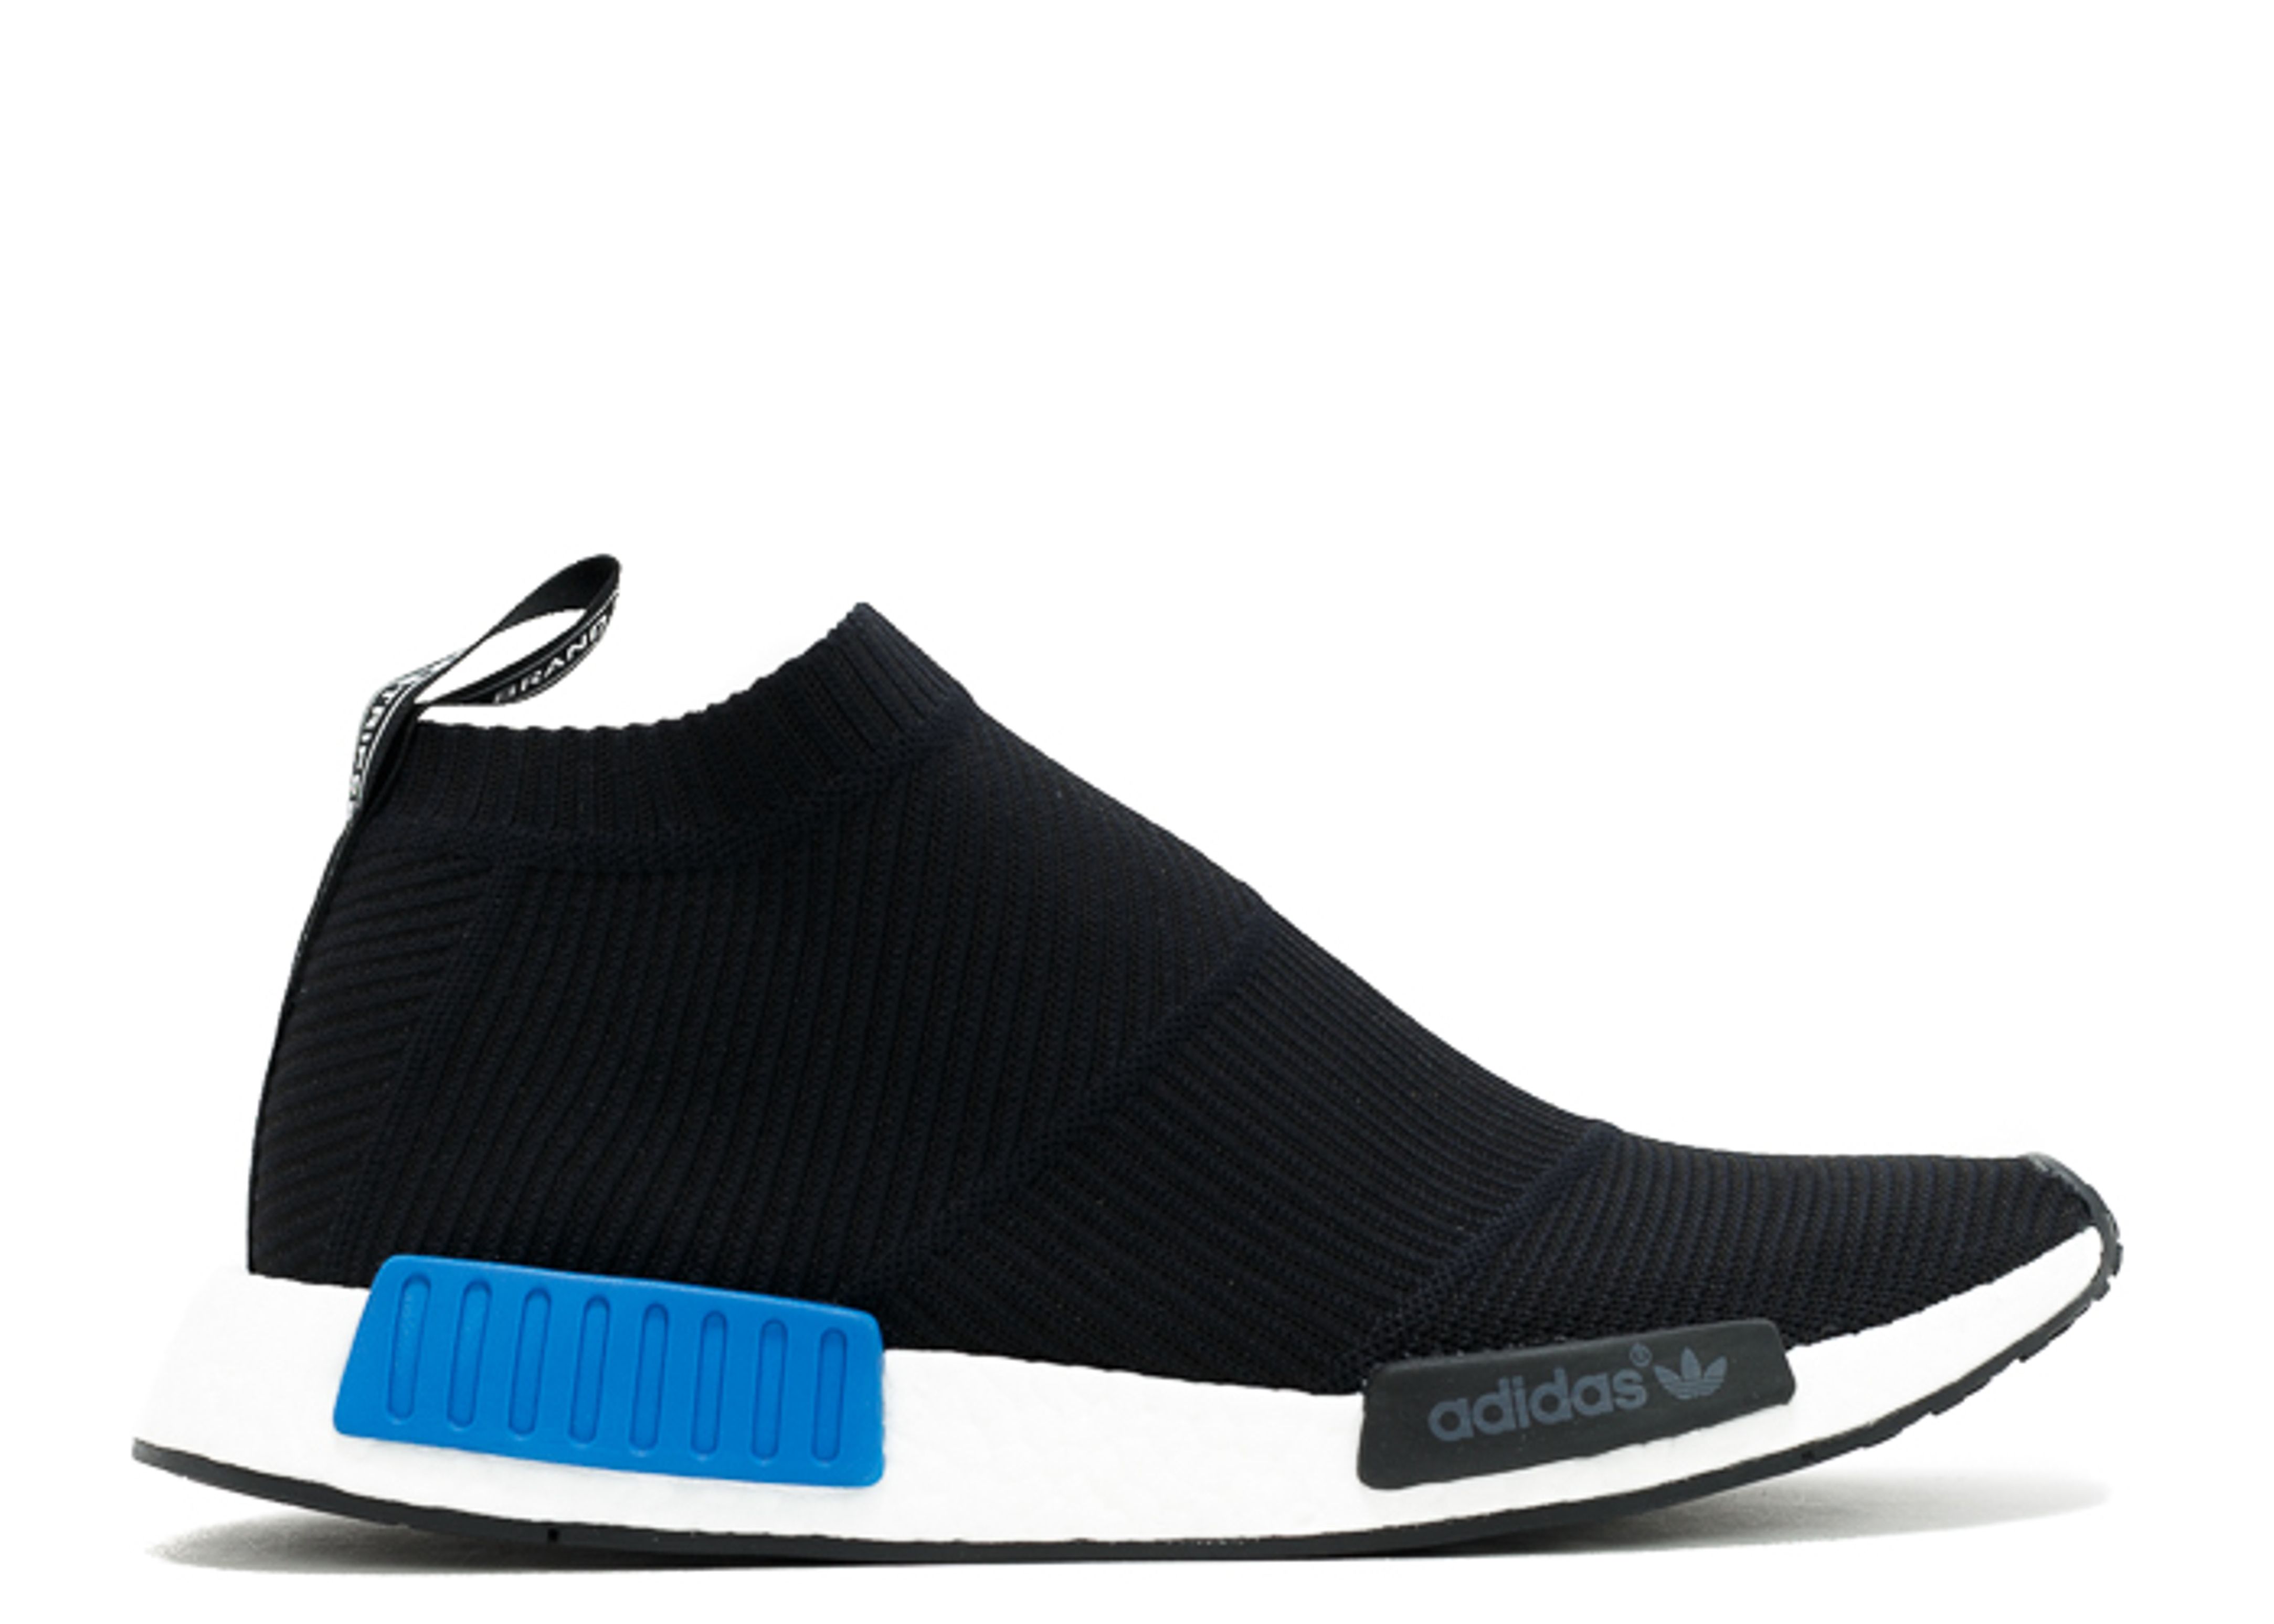 adidas NMD City Sock Mikitype Collaboration